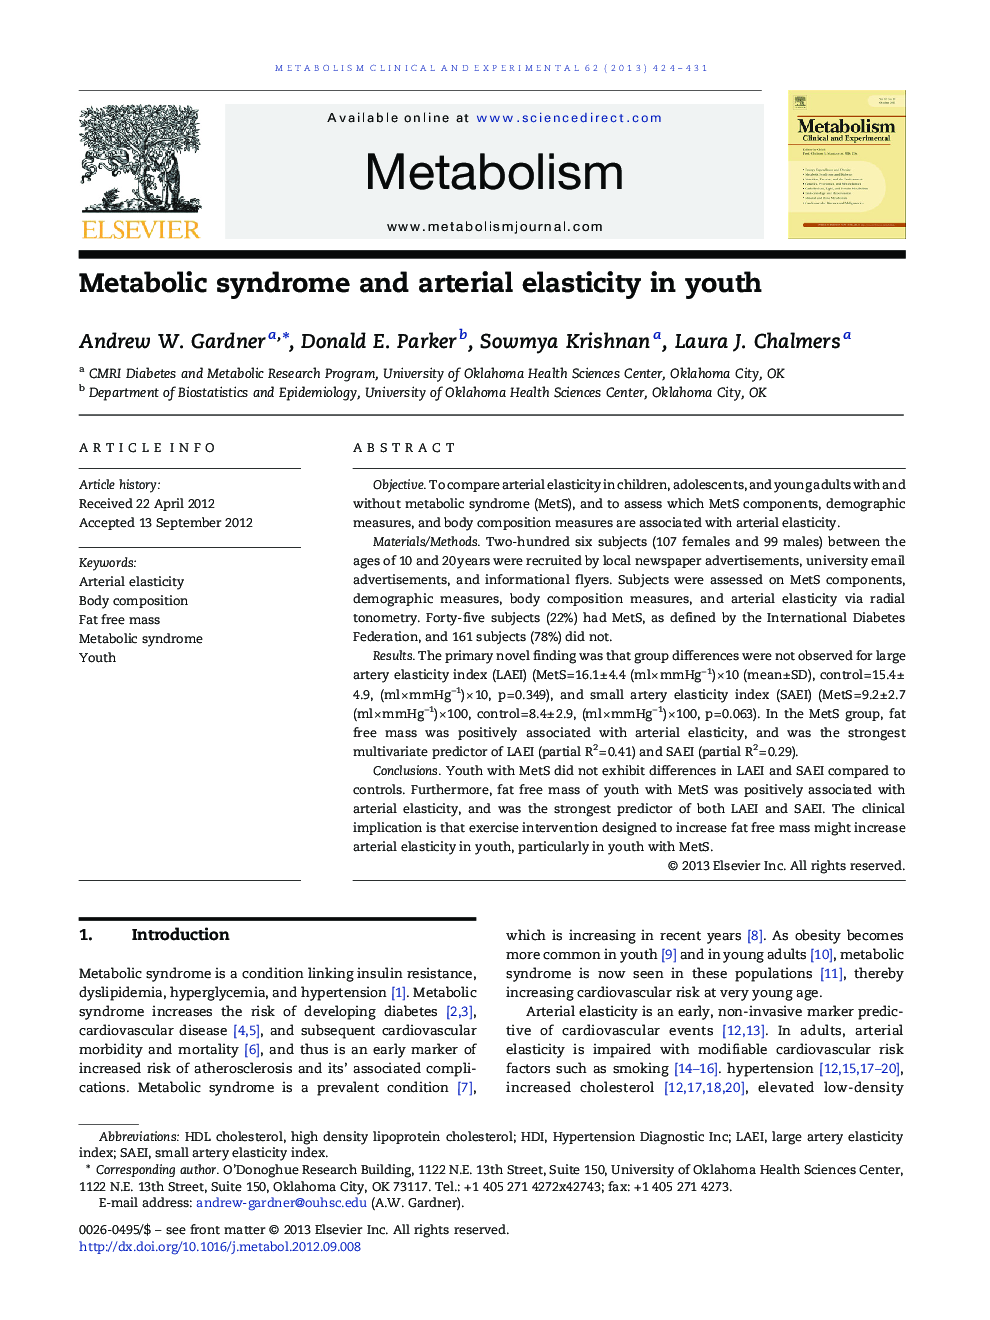 Metabolic syndrome and arterial elasticity in youth